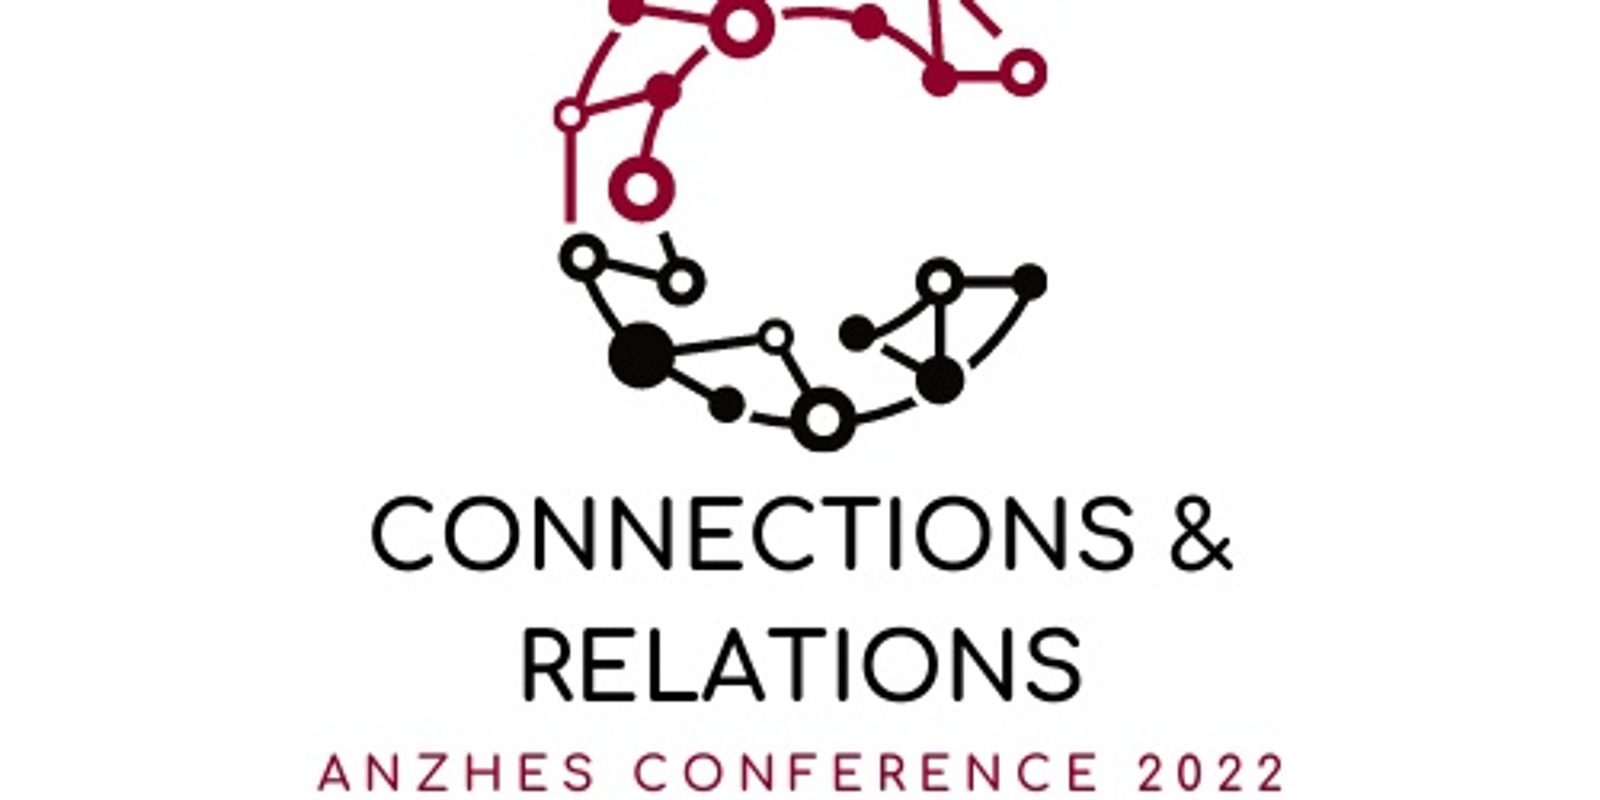 Banner image for ANZHES Conference 2022